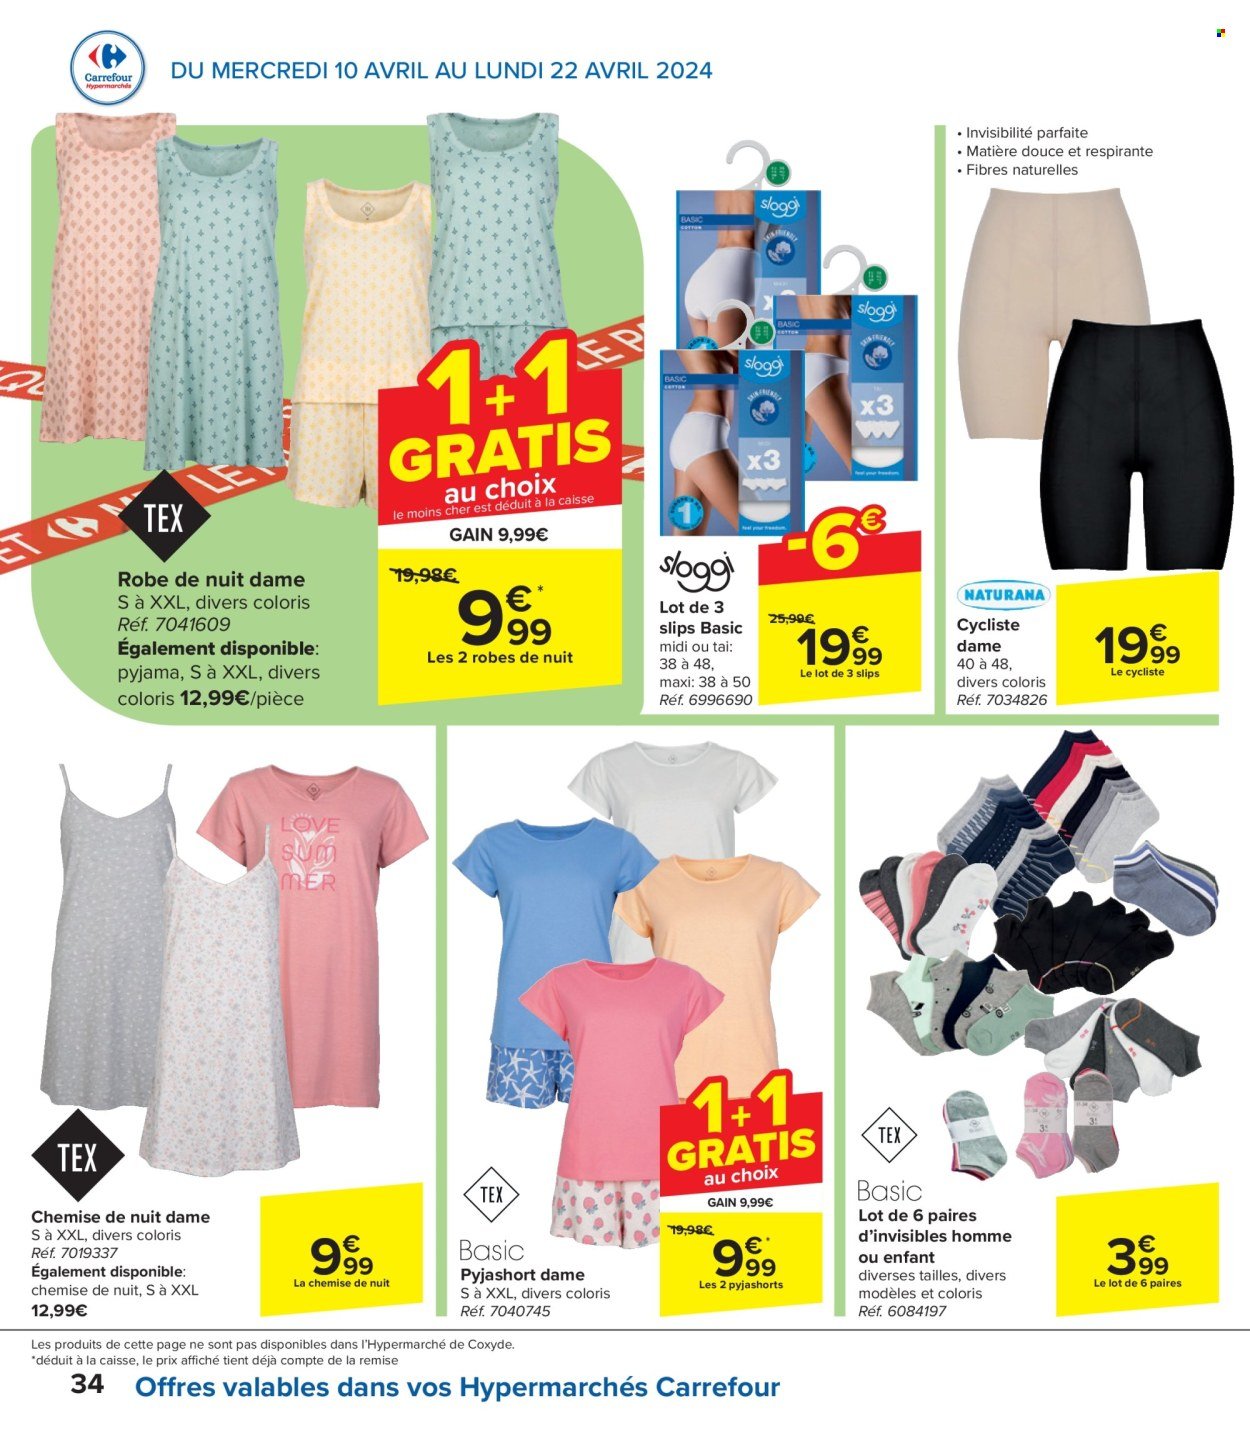 Catalogue Carrefour hypermarkt - 10.4.2024 - 22.4.2024. Page 34.